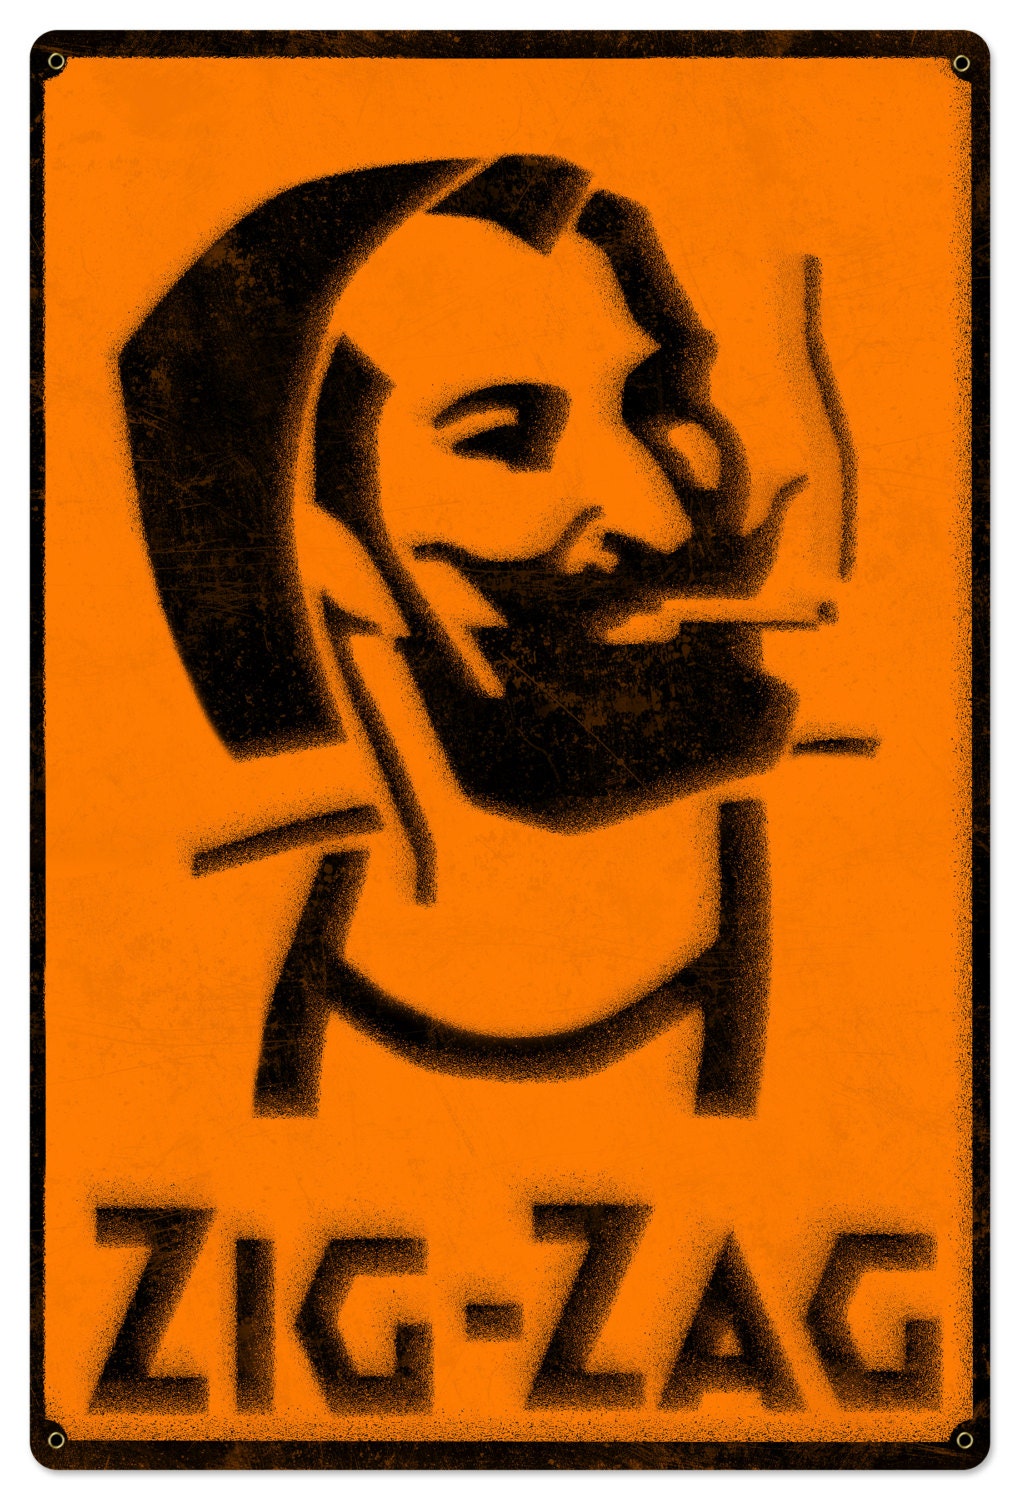  Zig Zag Man  rolling papers Spray Art Metal Sign by 